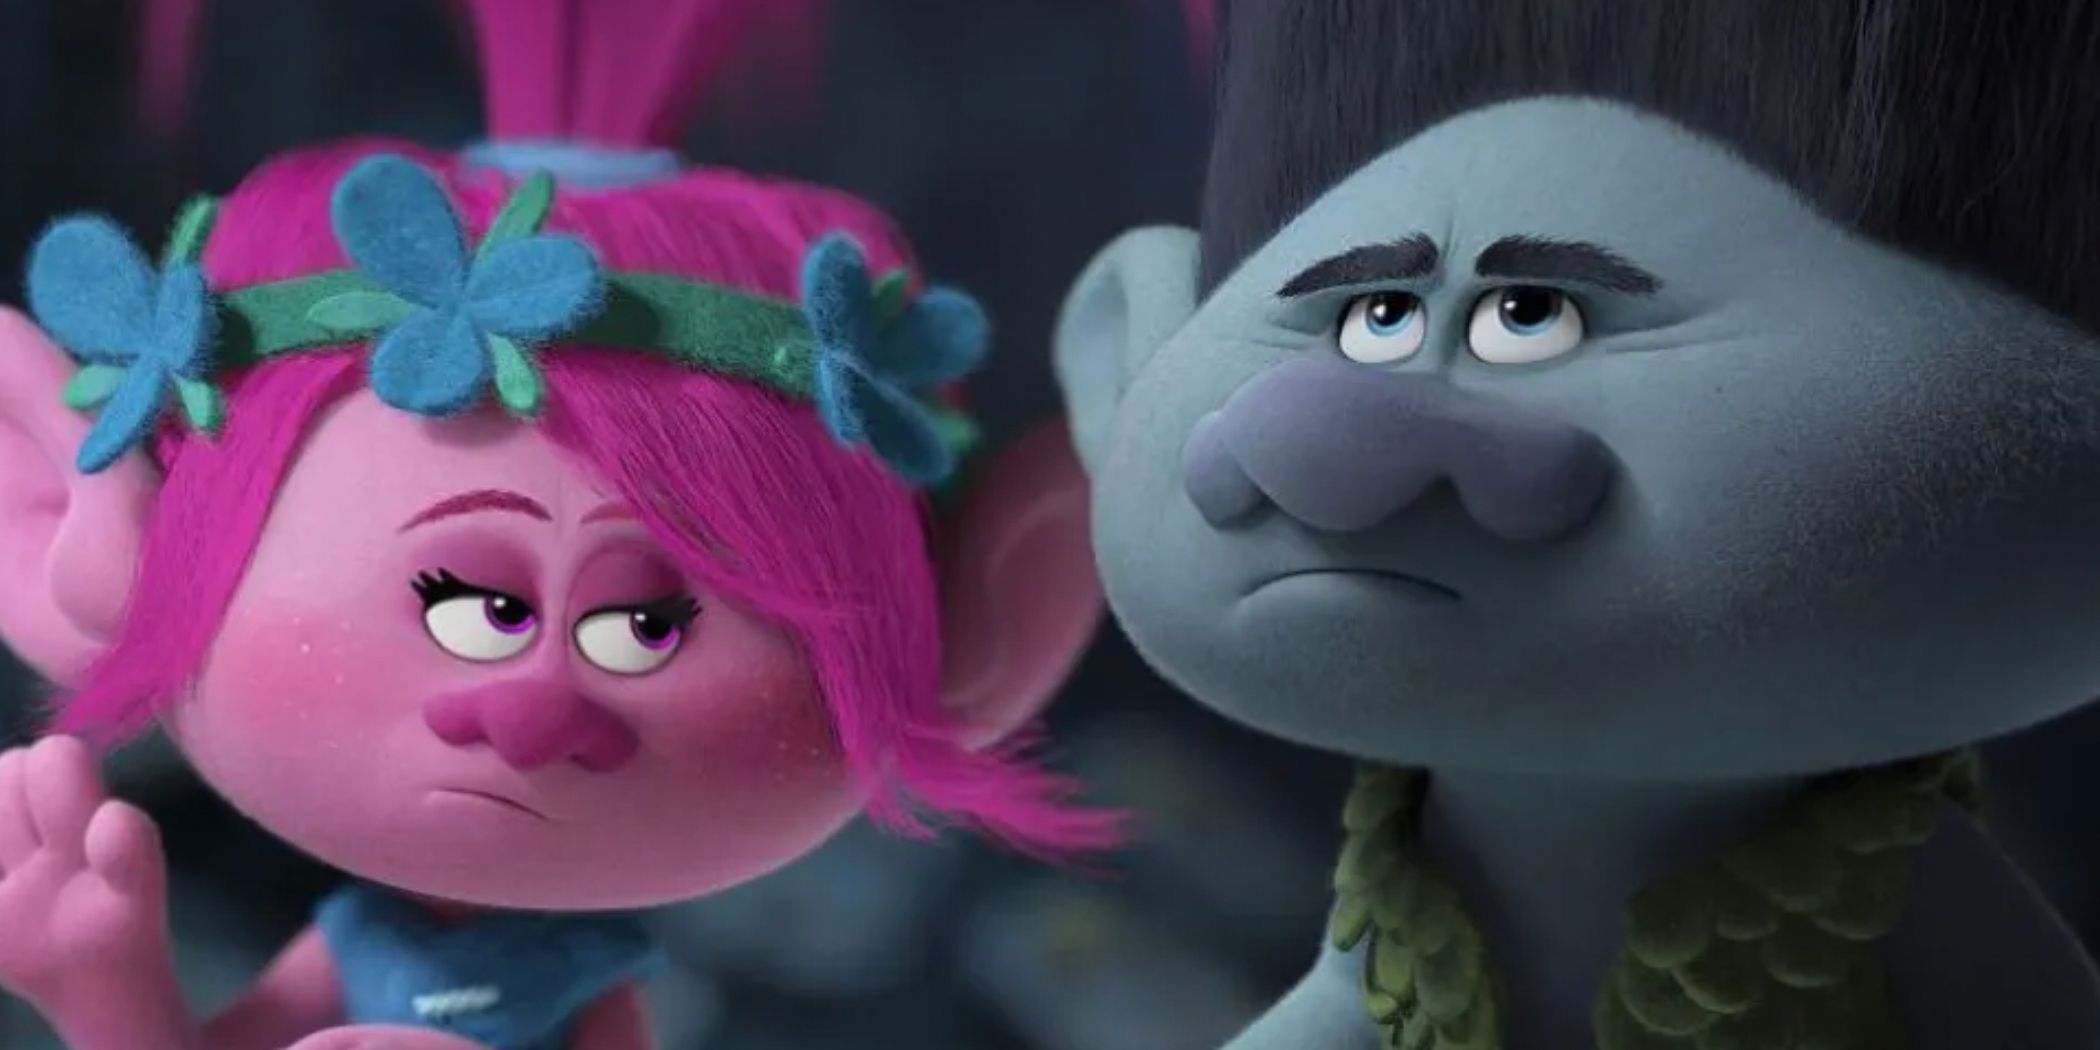 Poppy and Branch sit together in Trolls